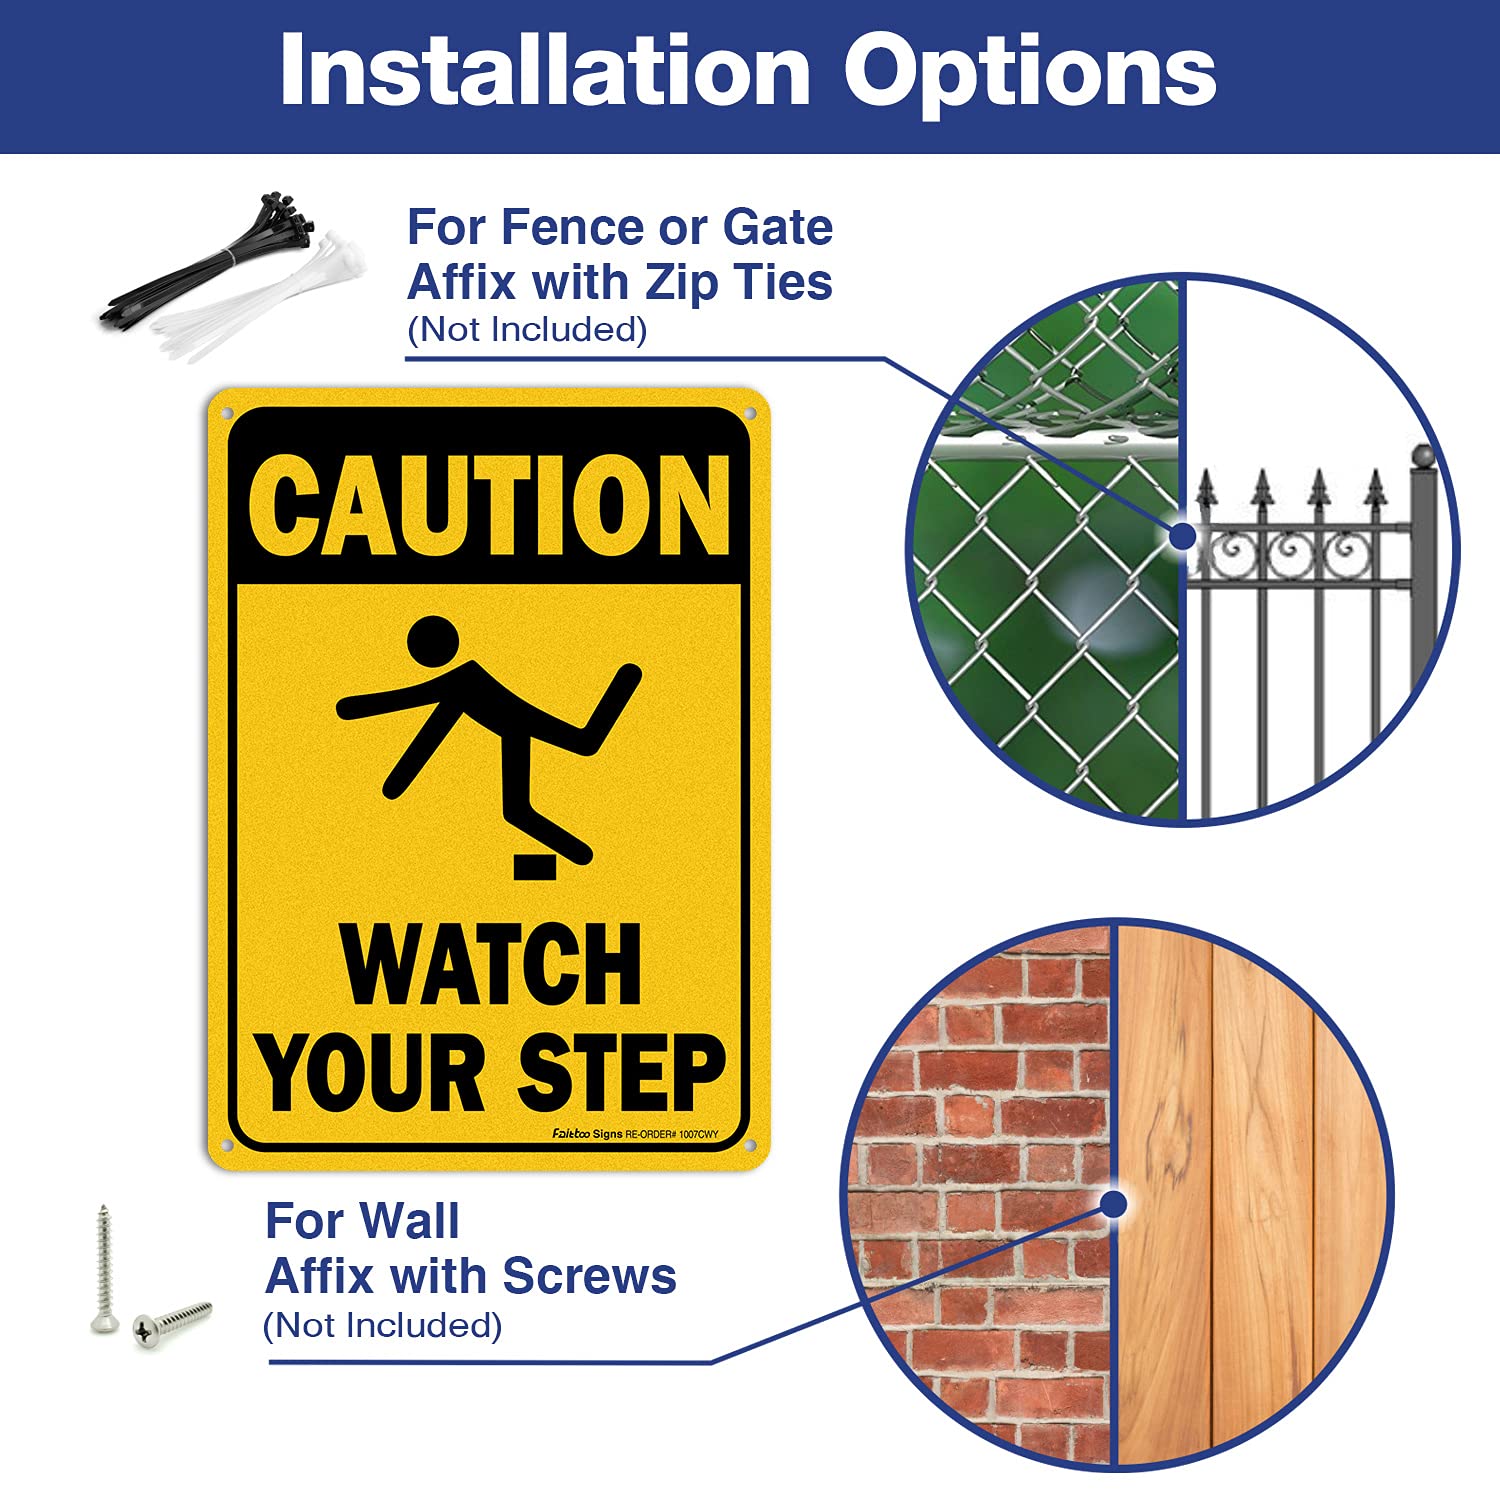 (4 Pack) Caution Watch Your Step Sign Safety Sign, 10 x 7 Inches rectangle.040 Rust Free Aluminum, UV Protected and Waterproof, Weather Resistant, Durable Ink, Easy to Mount